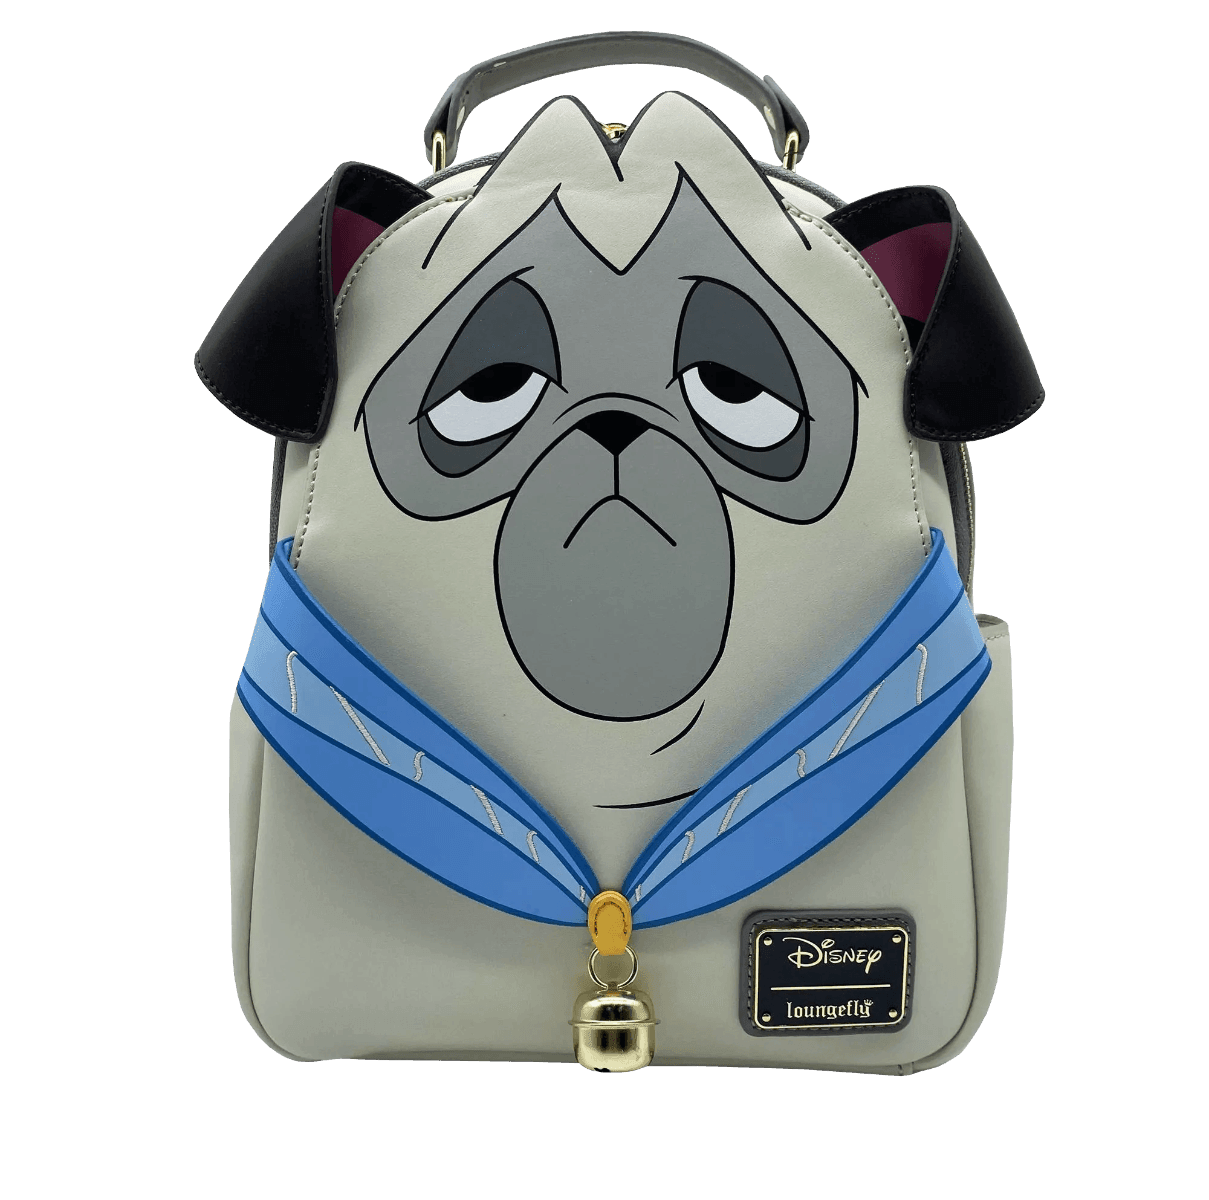 LOUWDBK2012 Pocahontas - Percy US Exclusive Mini Backpack - Loungefly - Titan Pop Culture